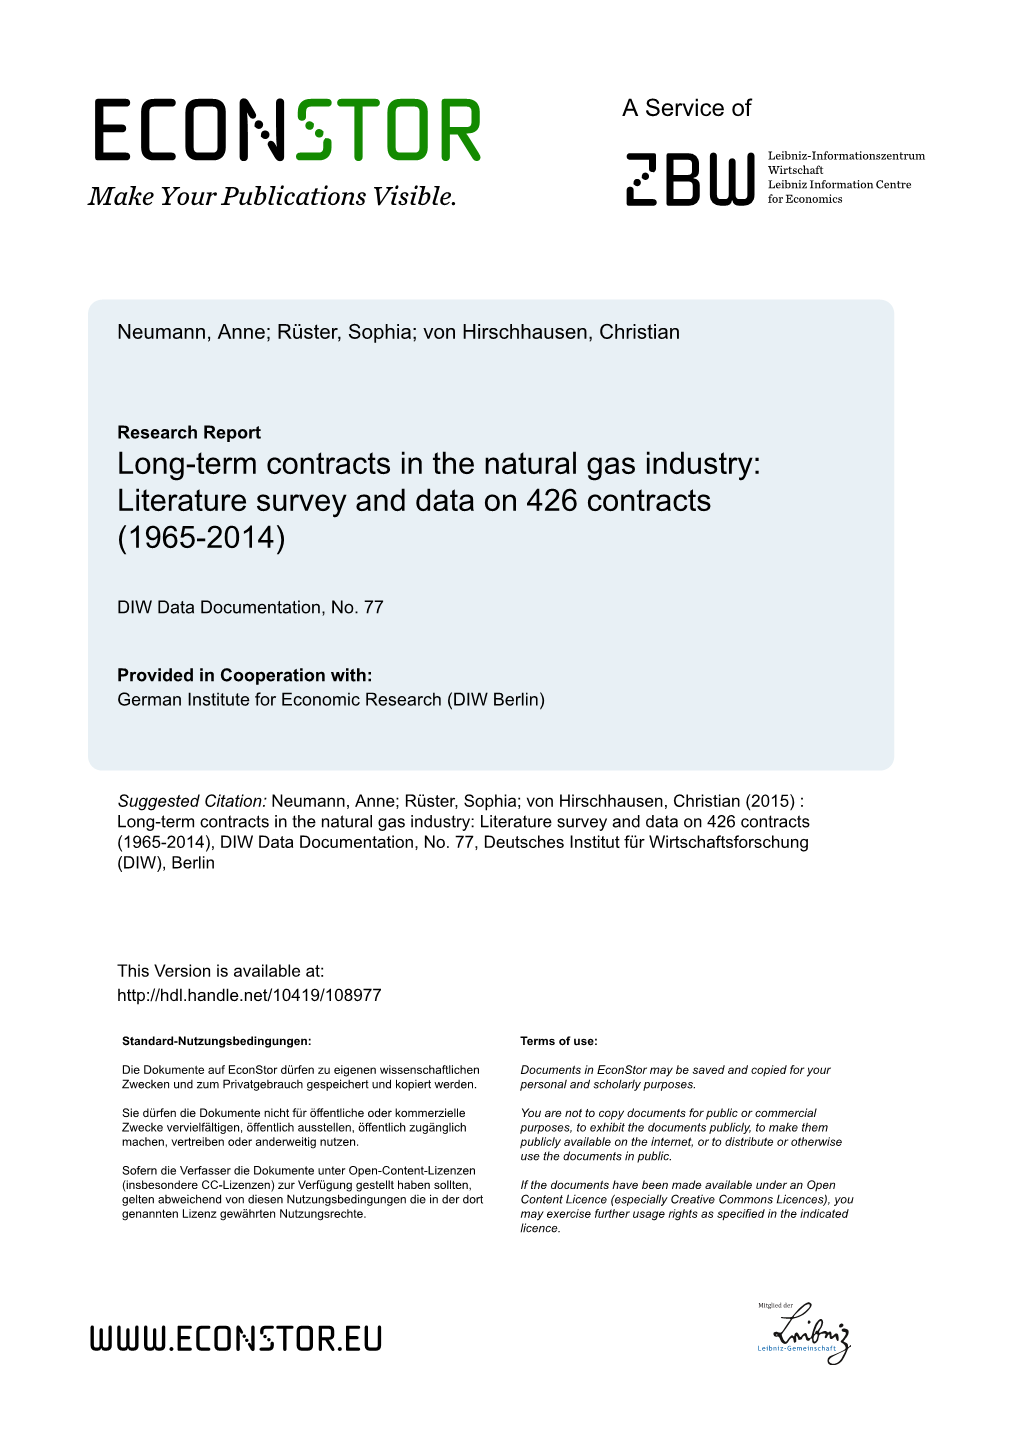 Long-Term Contracts in the Natural Gas Industry: Literature Survey and Data on 426 Contracts (1965-2014)